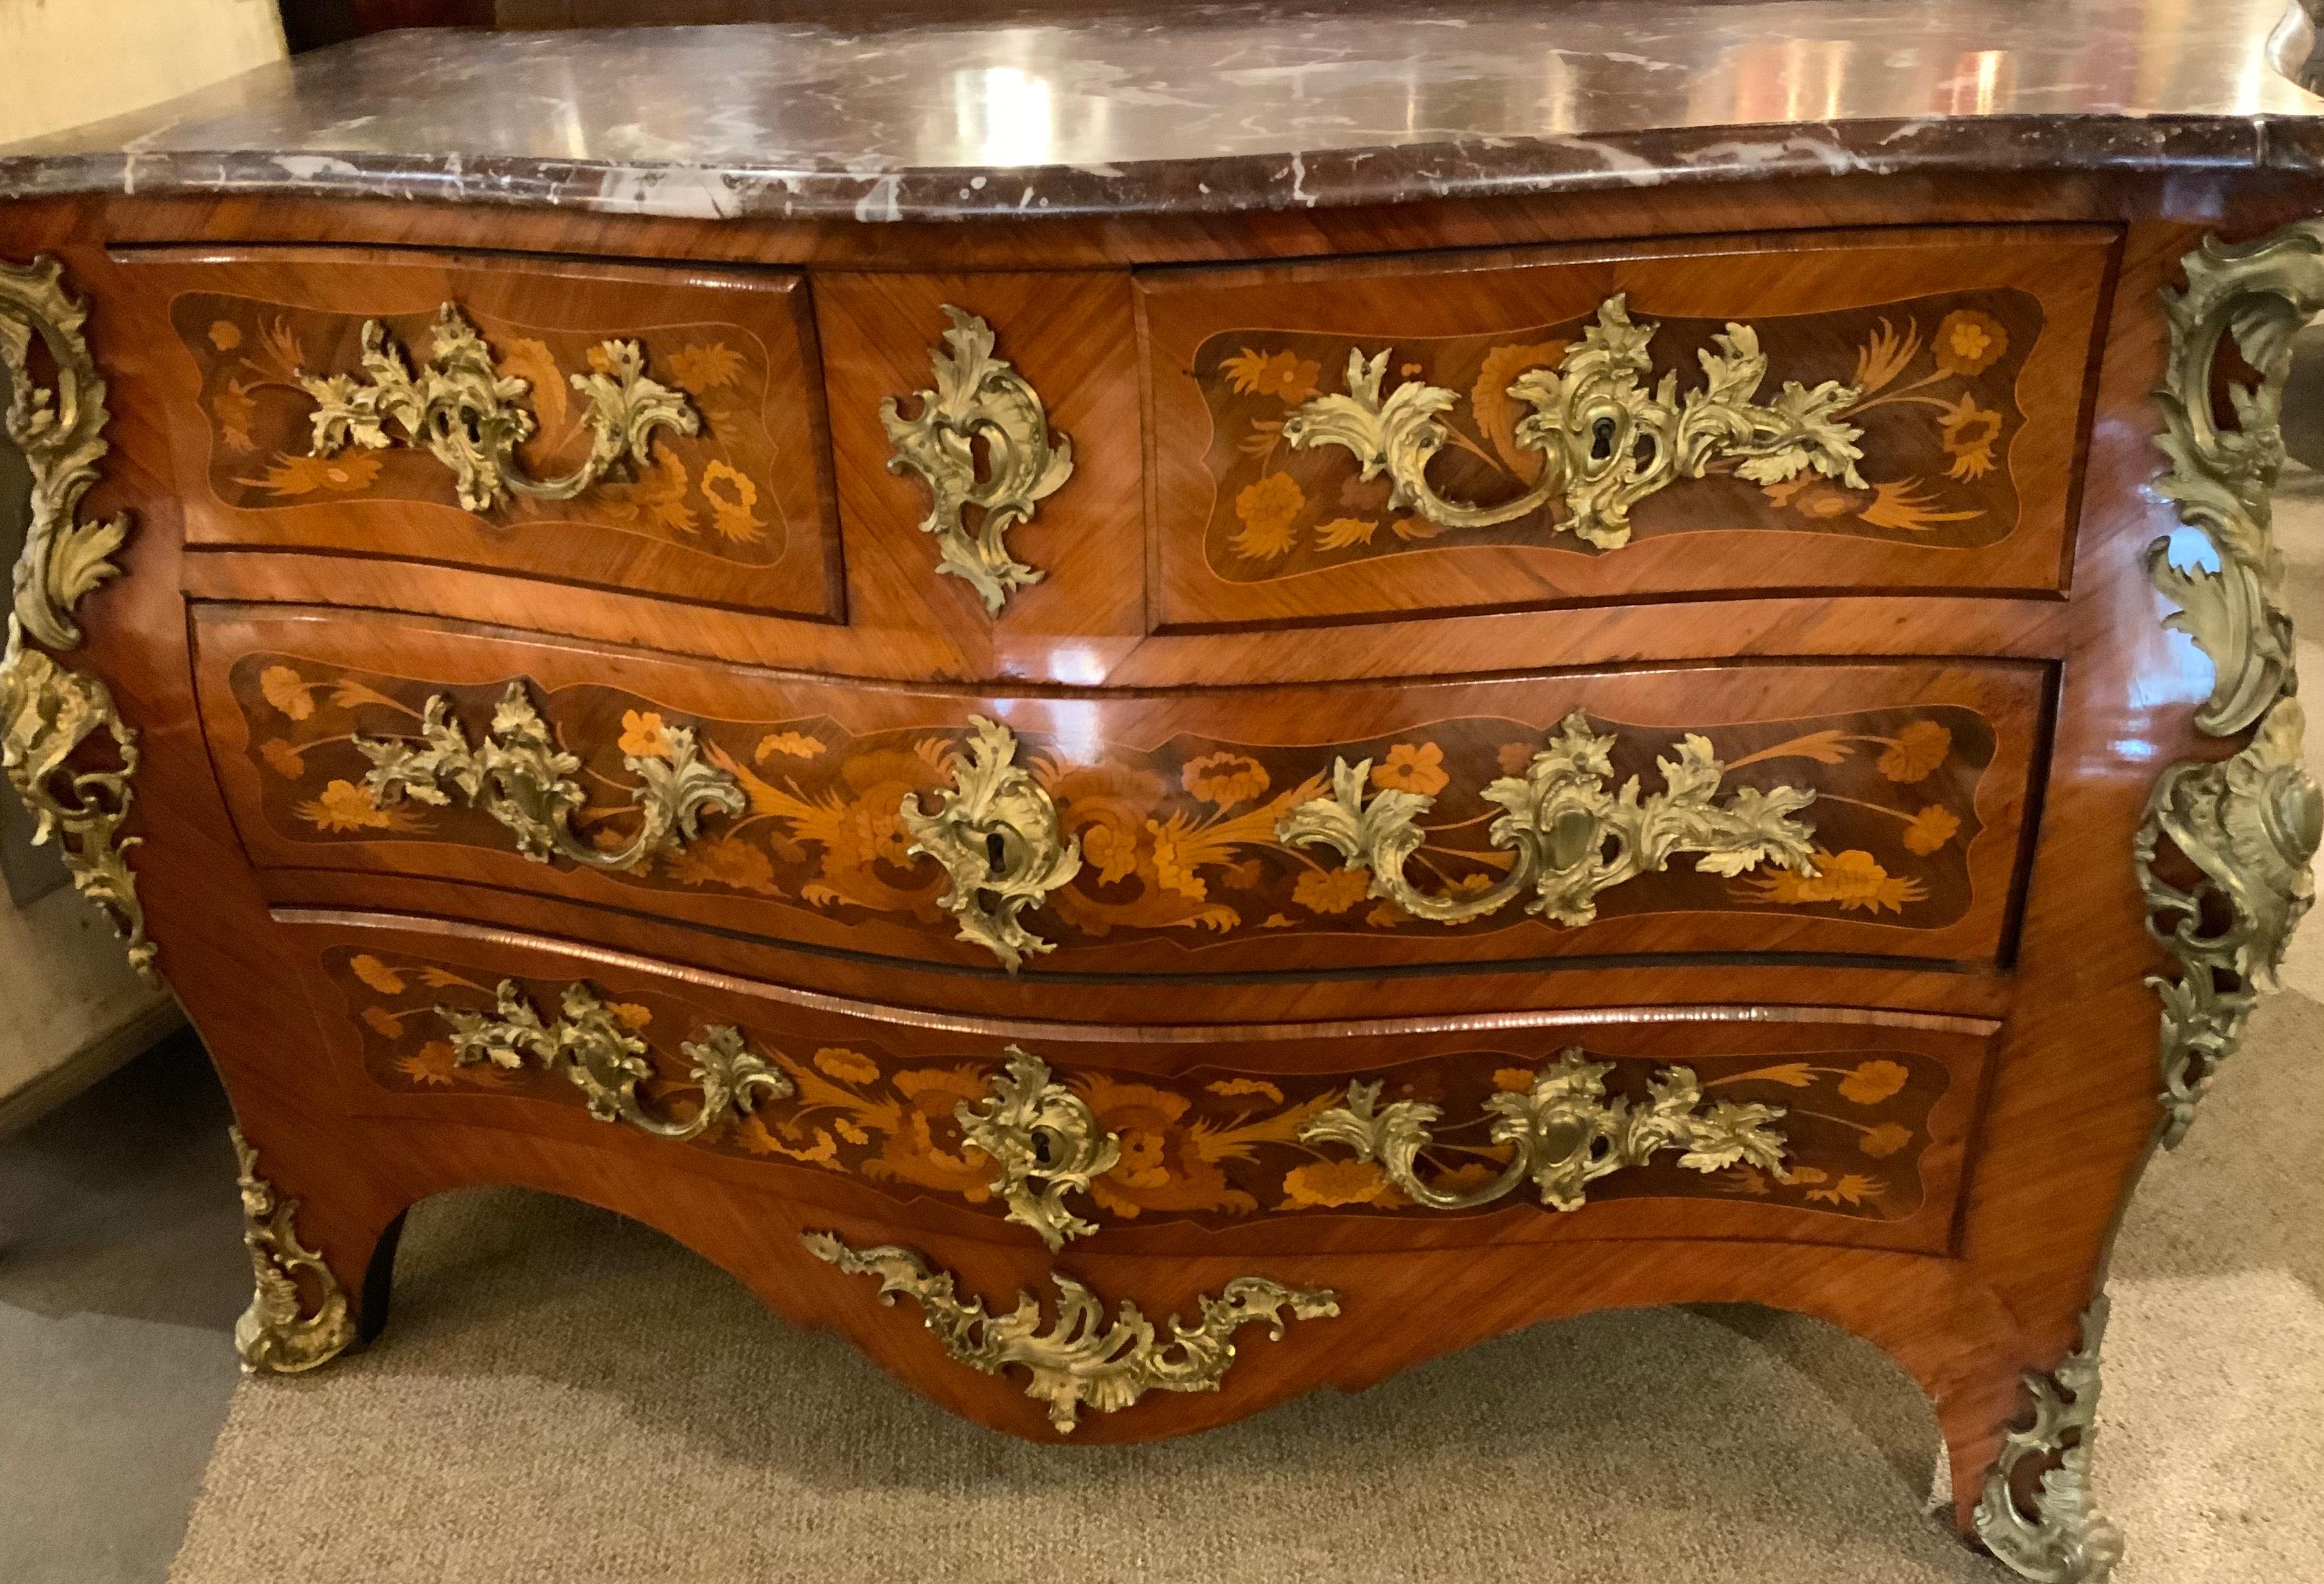 French Regence Style Bombe’ Commode, 19th Century with Marble Top, Floral Marquetry